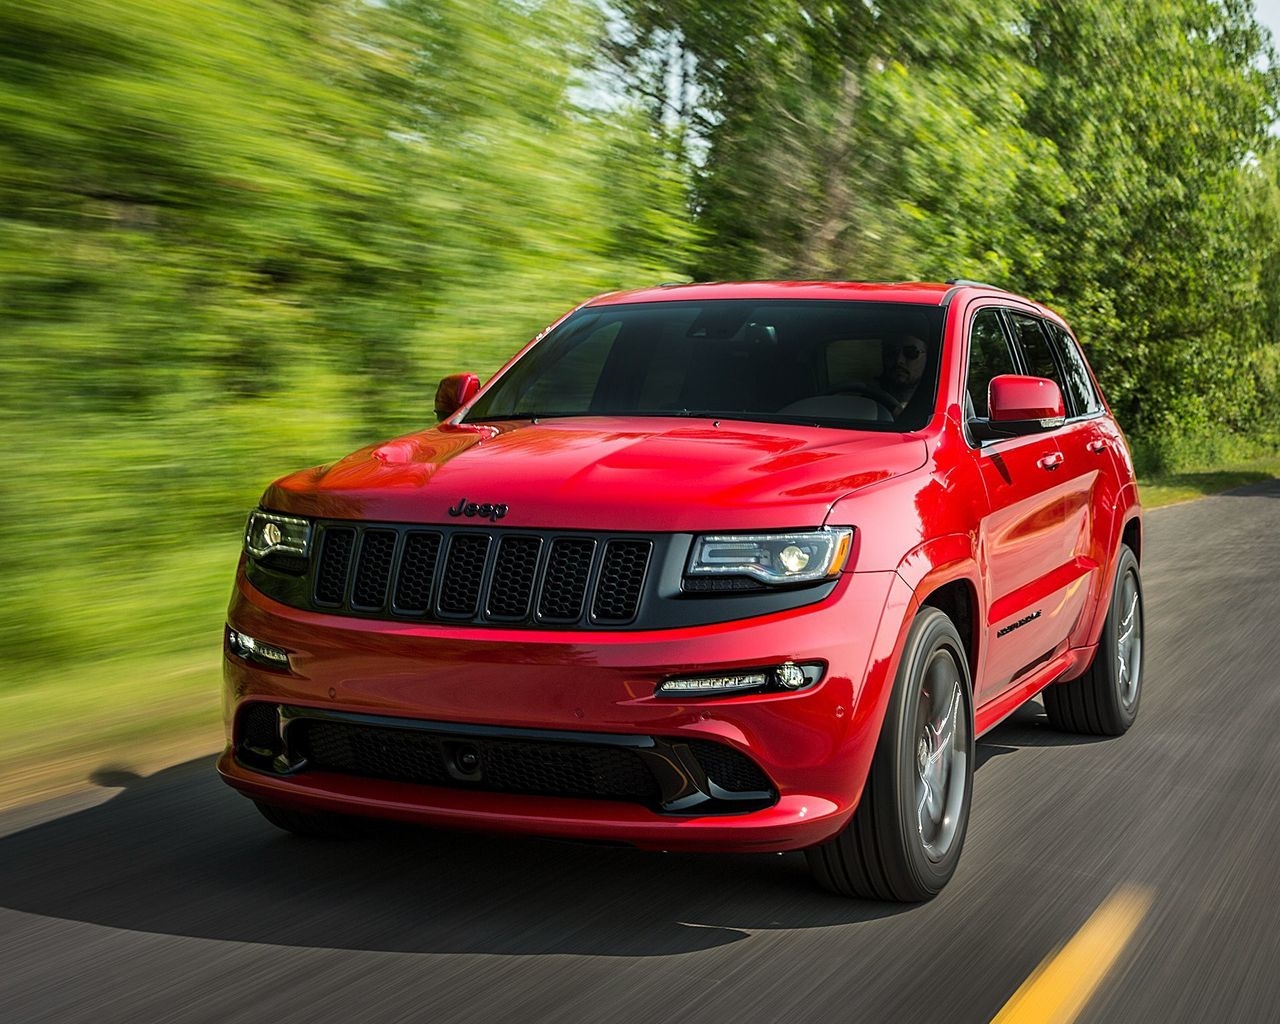 Jeep Grand Cherokee SRT8 for 1280 x 1024 resolution